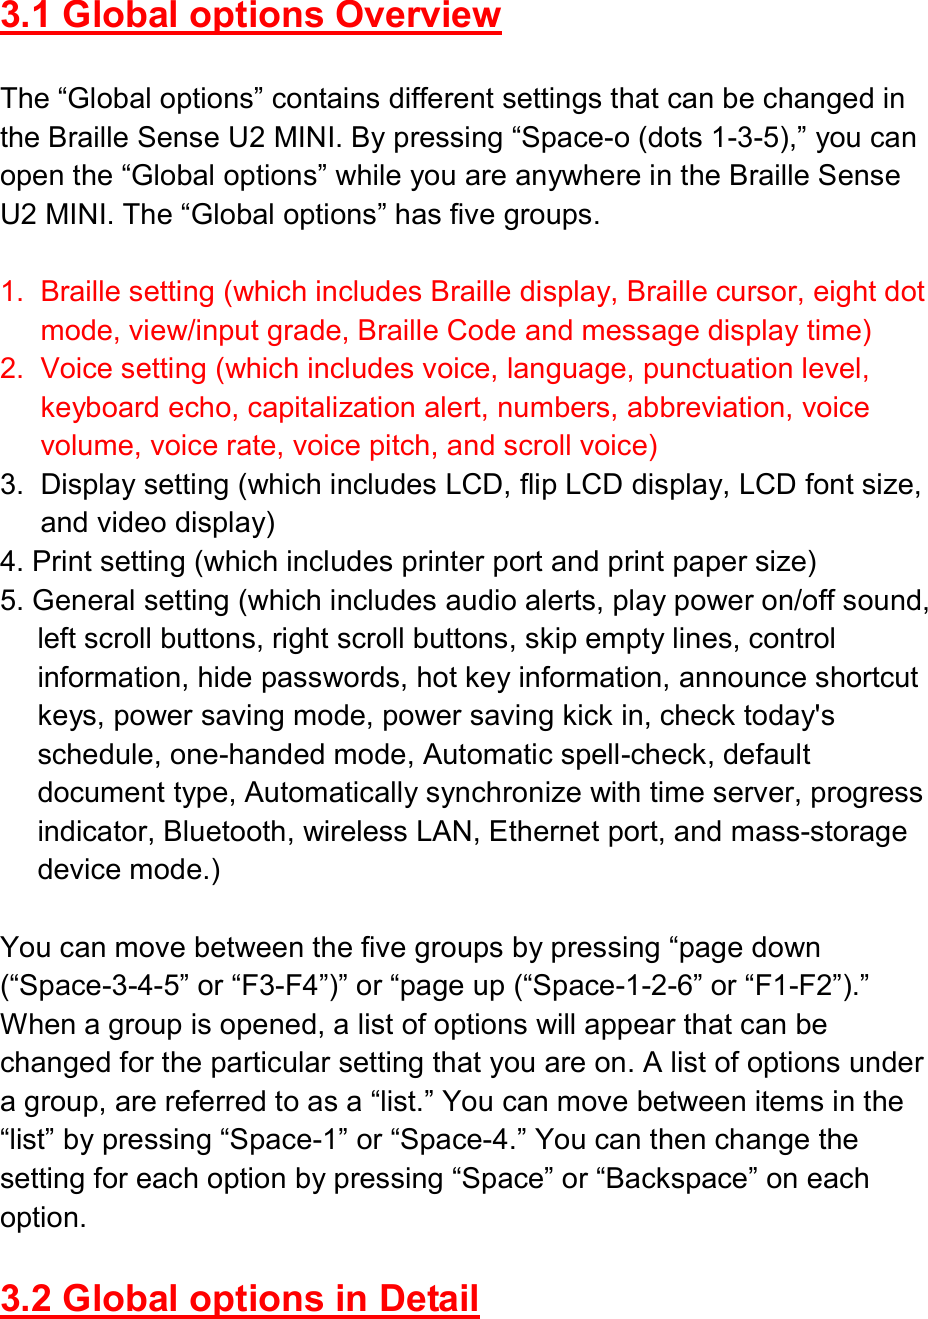  3.1 Global options Overview  The “Global options” contains different settings that can be changed in the Braille Sense U2 MINI. By pressing “Space-o (dots 1-3-5),” you can open the “Global options” while you are anywhere in the Braille Sense U2 MINI. The “Global options” has five groups.  1.  Braille setting (which includes Braille display, Braille cursor, eight dot mode, view/input grade, Braille Code and message display time)   2.  Voice setting (which includes voice, language, punctuation level, keyboard echo, capitalization alert, numbers, abbreviation, voice volume, voice rate, voice pitch, and scroll voice) 3.  Display setting (which includes LCD, flip LCD display, LCD font size, and video display) 4. Print setting (which includes printer port and print paper size) 5. General setting (which includes audio alerts, play power on/off sound, left scroll buttons, right scroll buttons, skip empty lines, control information, hide passwords, hot key information, announce shortcut keys, power saving mode, power saving kick in, check today&apos;s schedule, one-handed mode, Automatic spell-check, default document type, Automatically synchronize with time server, progress indicator, Bluetooth, wireless LAN, Ethernet port, and mass-storage device mode.)  You can move between the five groups by pressing “page down (“Space-3-4-5” or “F3-F4”)” or “page up (“Space-1-2-6” or “F1-F2”).” When a group is opened, a list of options will appear that can be changed for the particular setting that you are on. A list of options under a group, are referred to as a “list.” You can move between items in the “list” by pressing “Space-1” or “Space-4.” You can then change the setting for each option by pressing “Space” or “Backspace” on each option.  3.2 Global options in Detail  